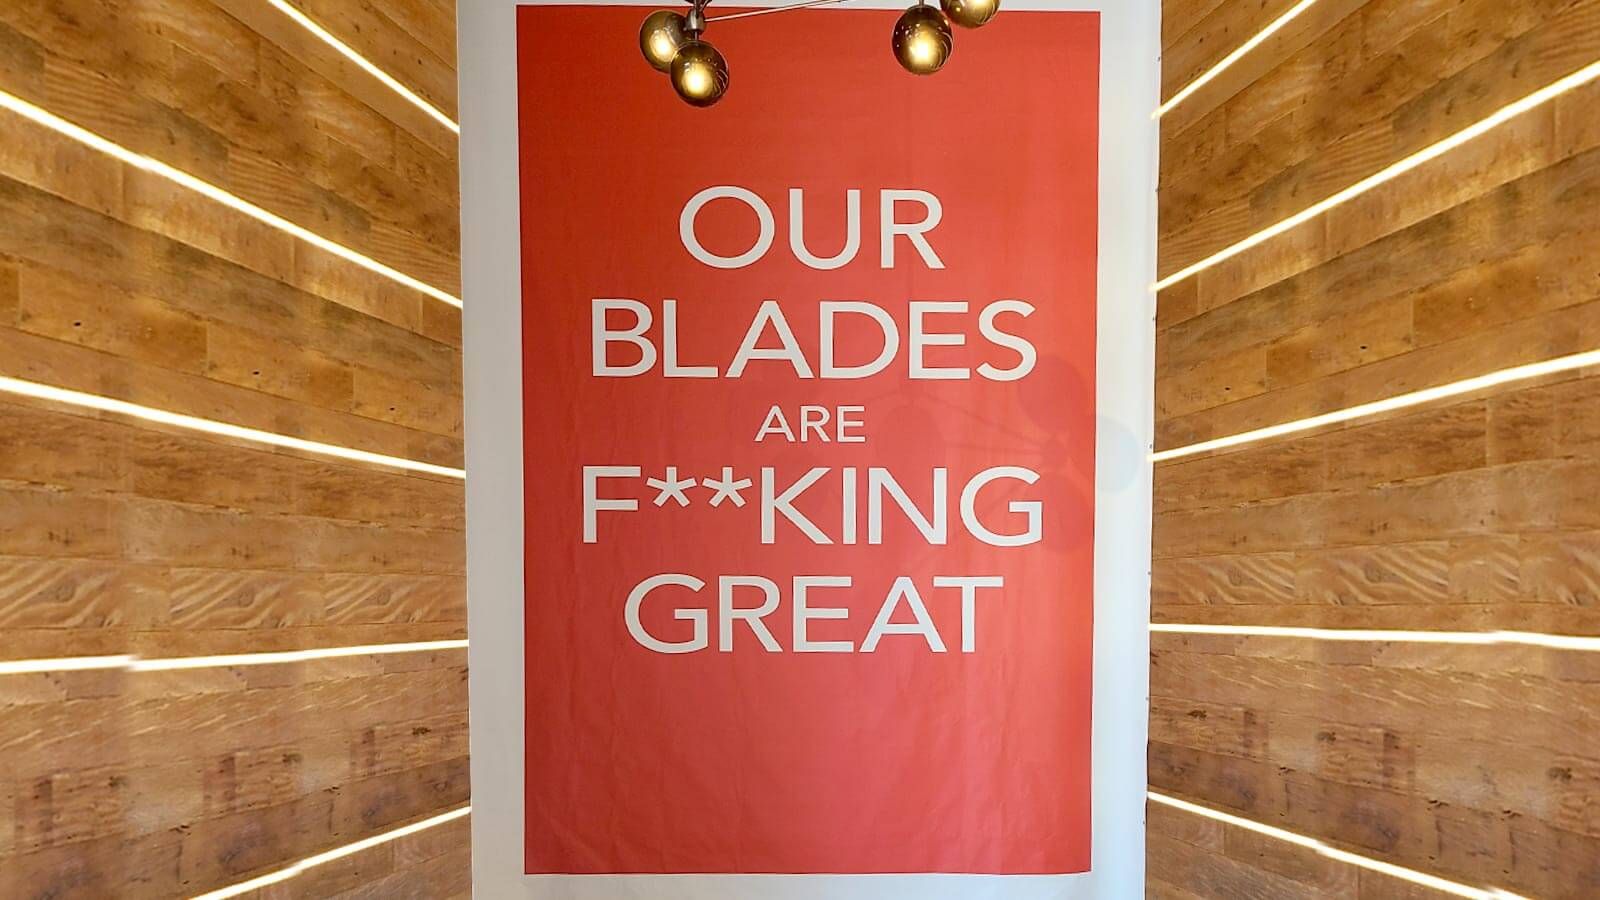 Dollar Shave Club canvas for office design